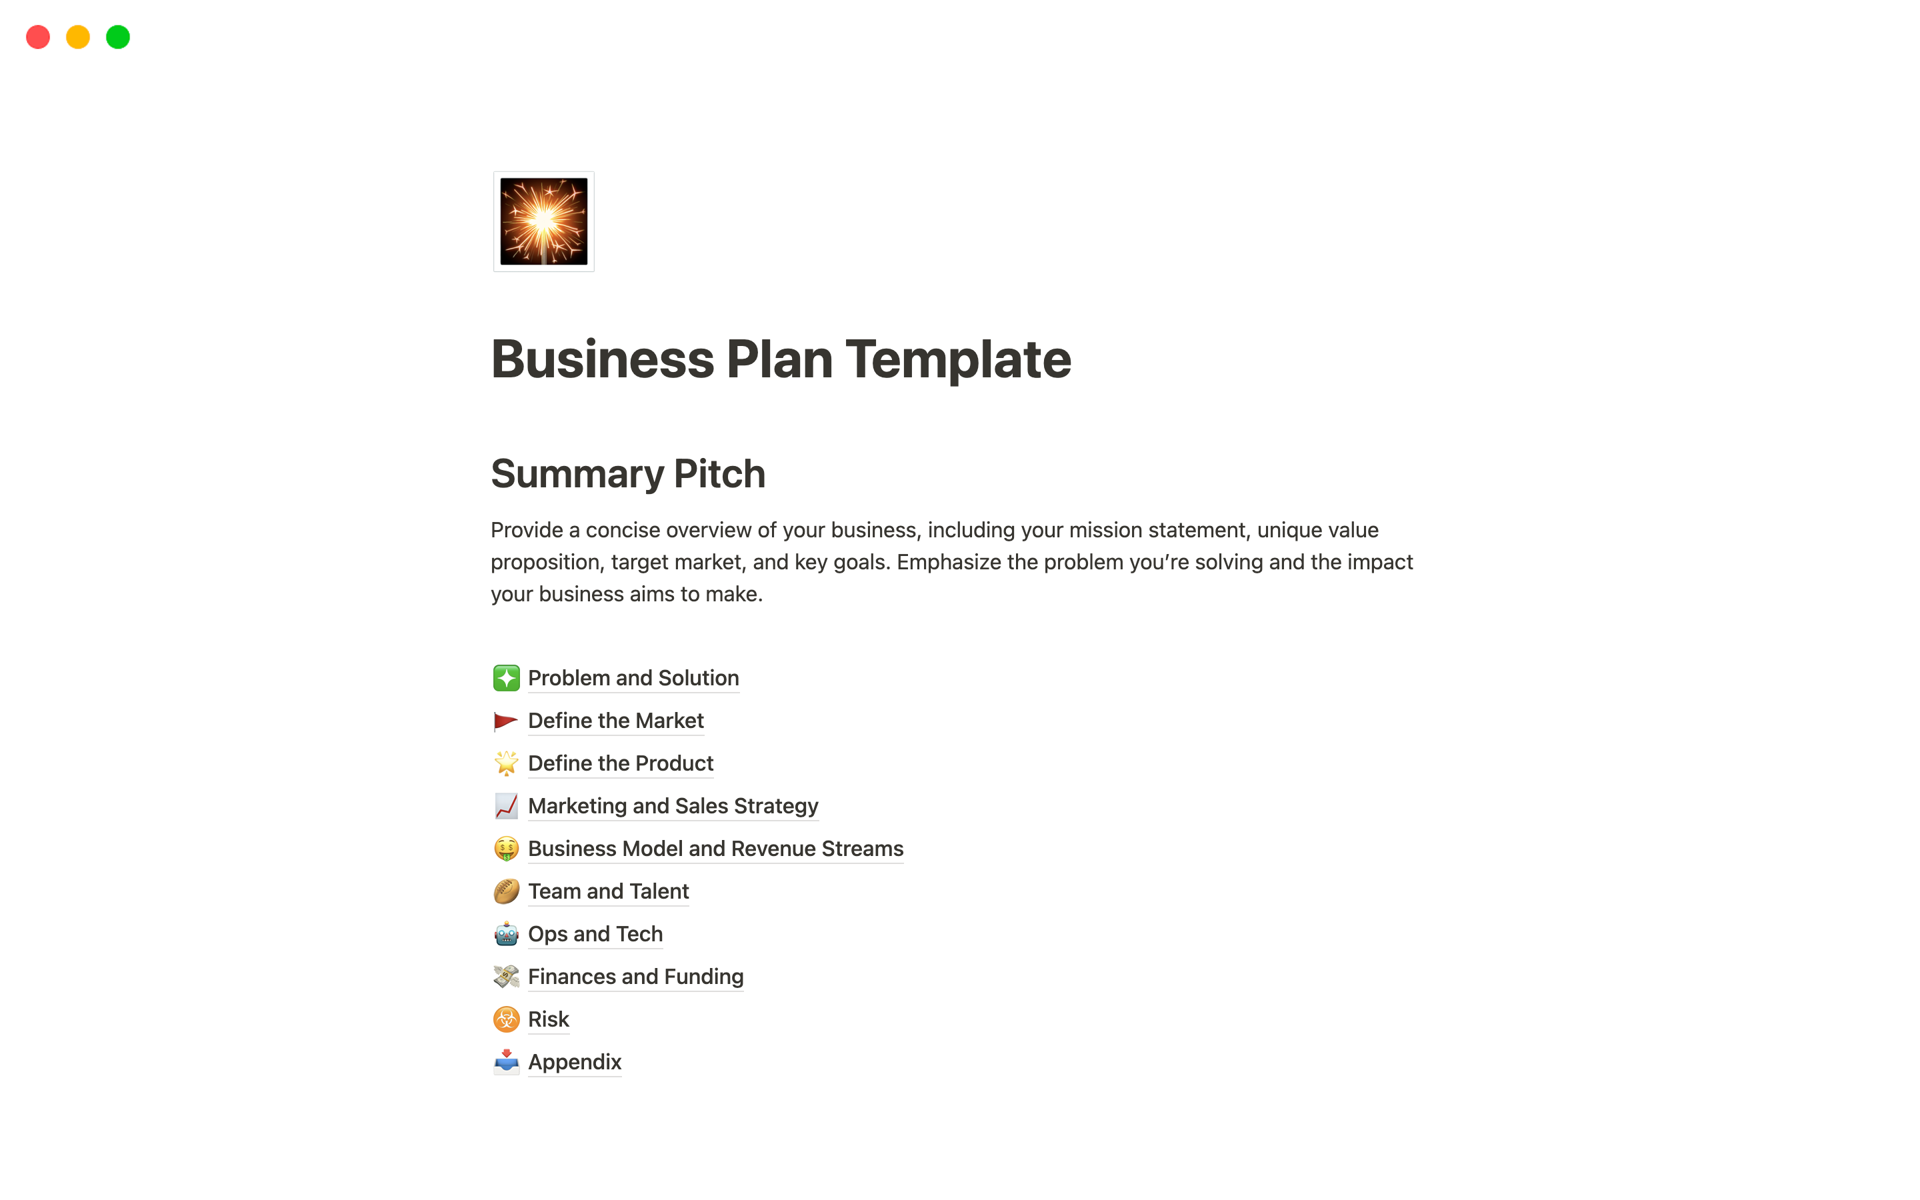 This template guides you through the basic structure of a business plan with guidance on each sub page.